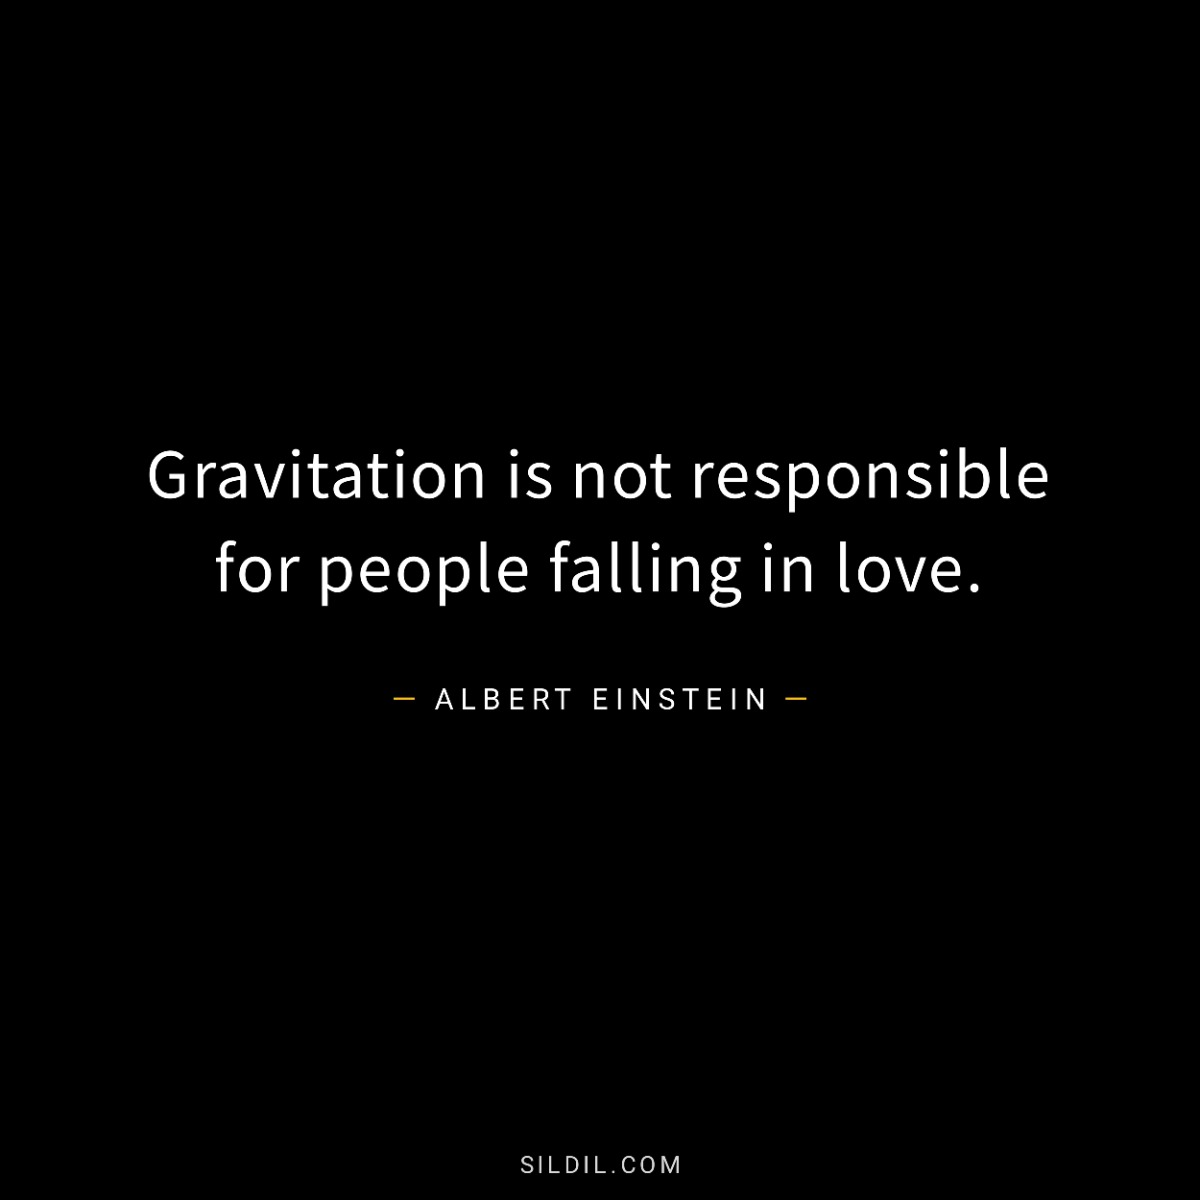 Gravitation is not responsible for people falling in love.